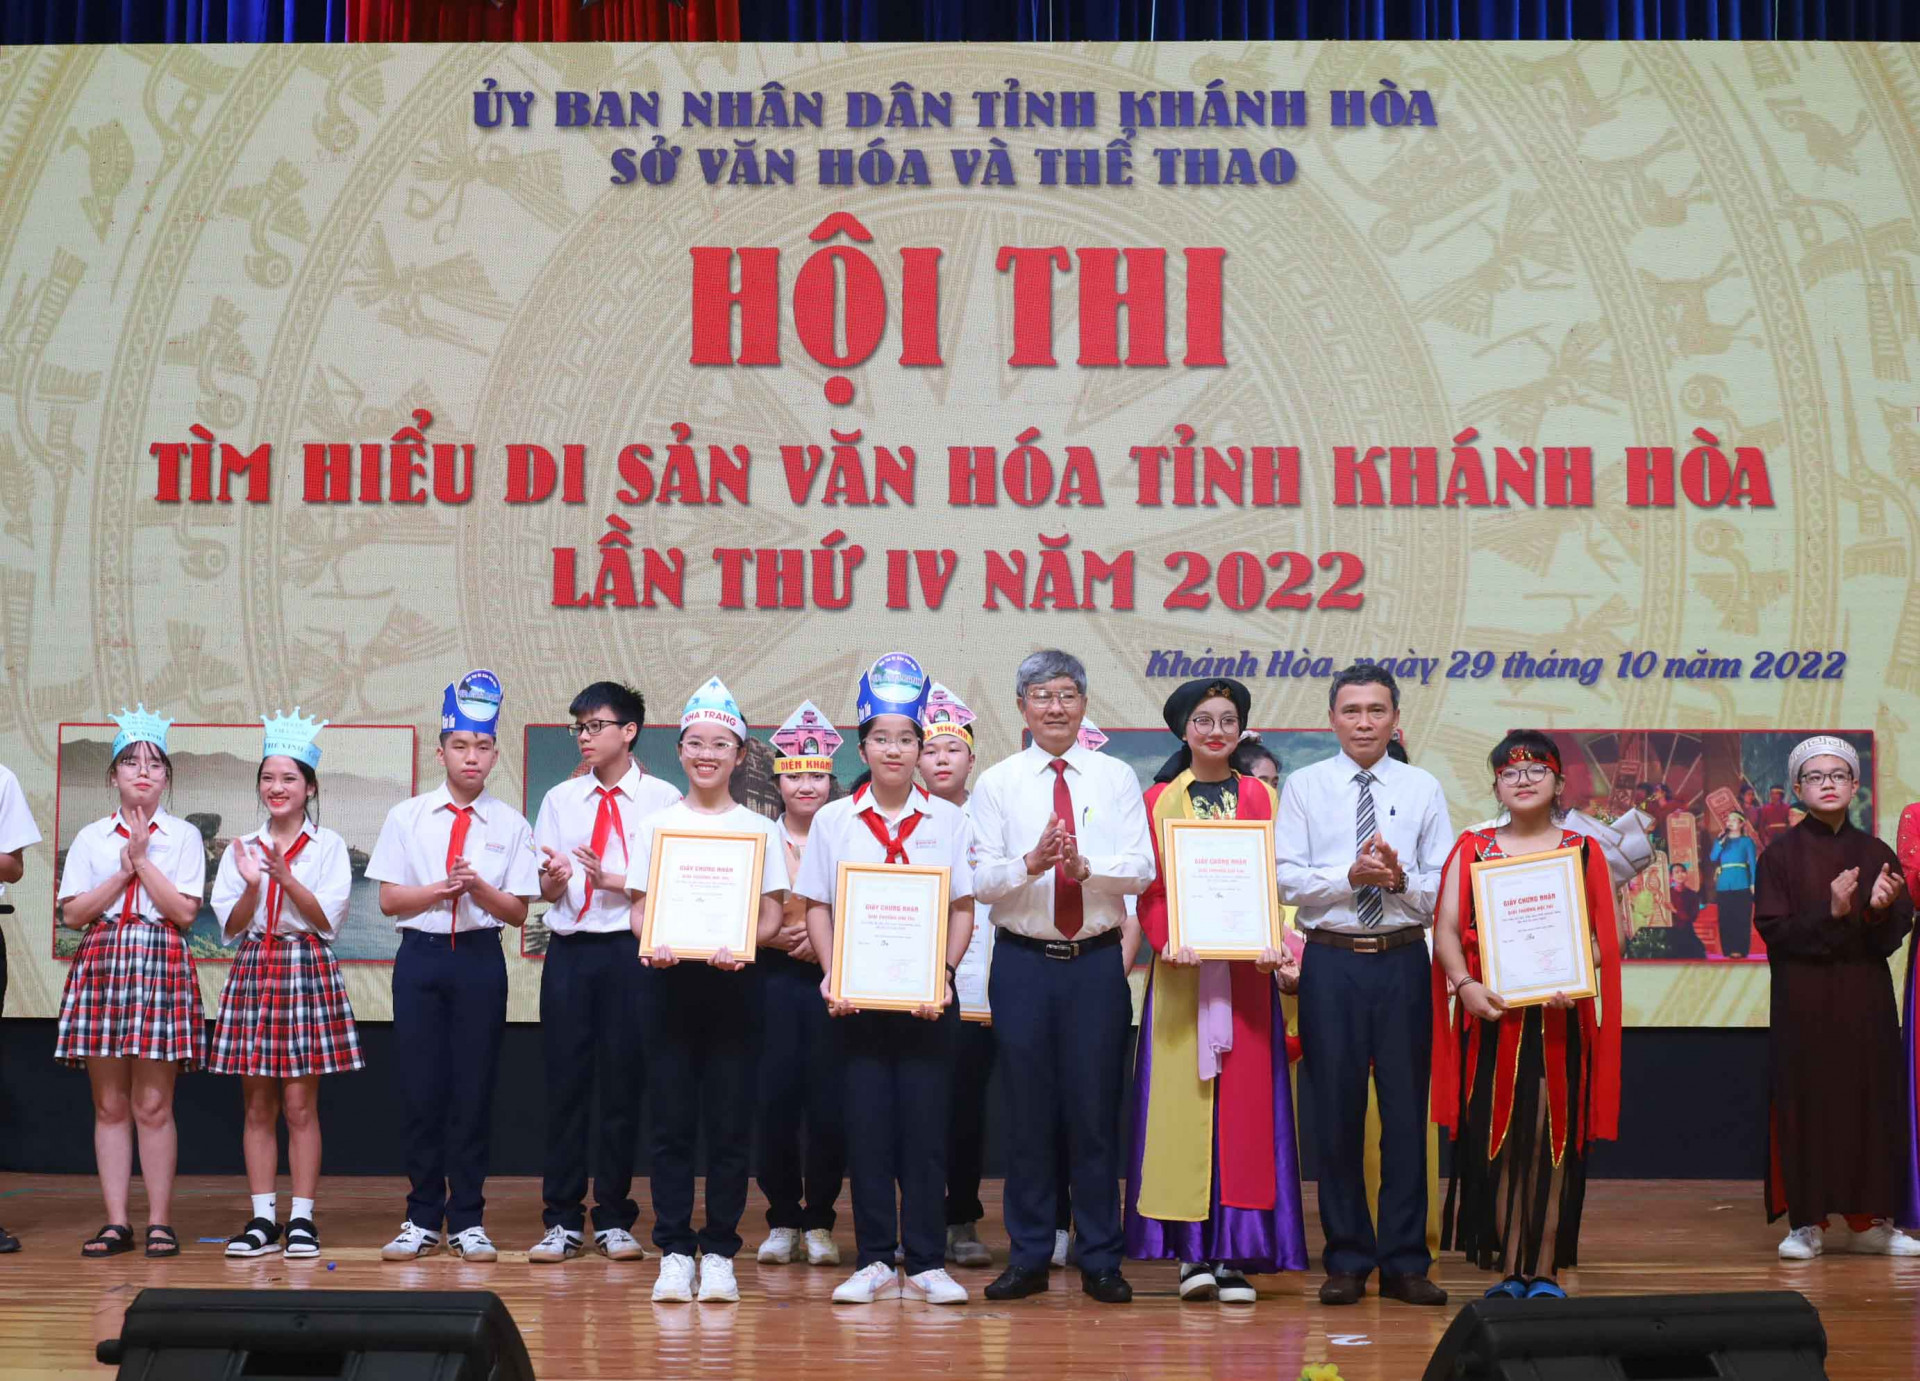 Leaders of the provincial Party Committee's Propaganda and Training Department and the provincial Department of Education and Training awarded teams third prizes